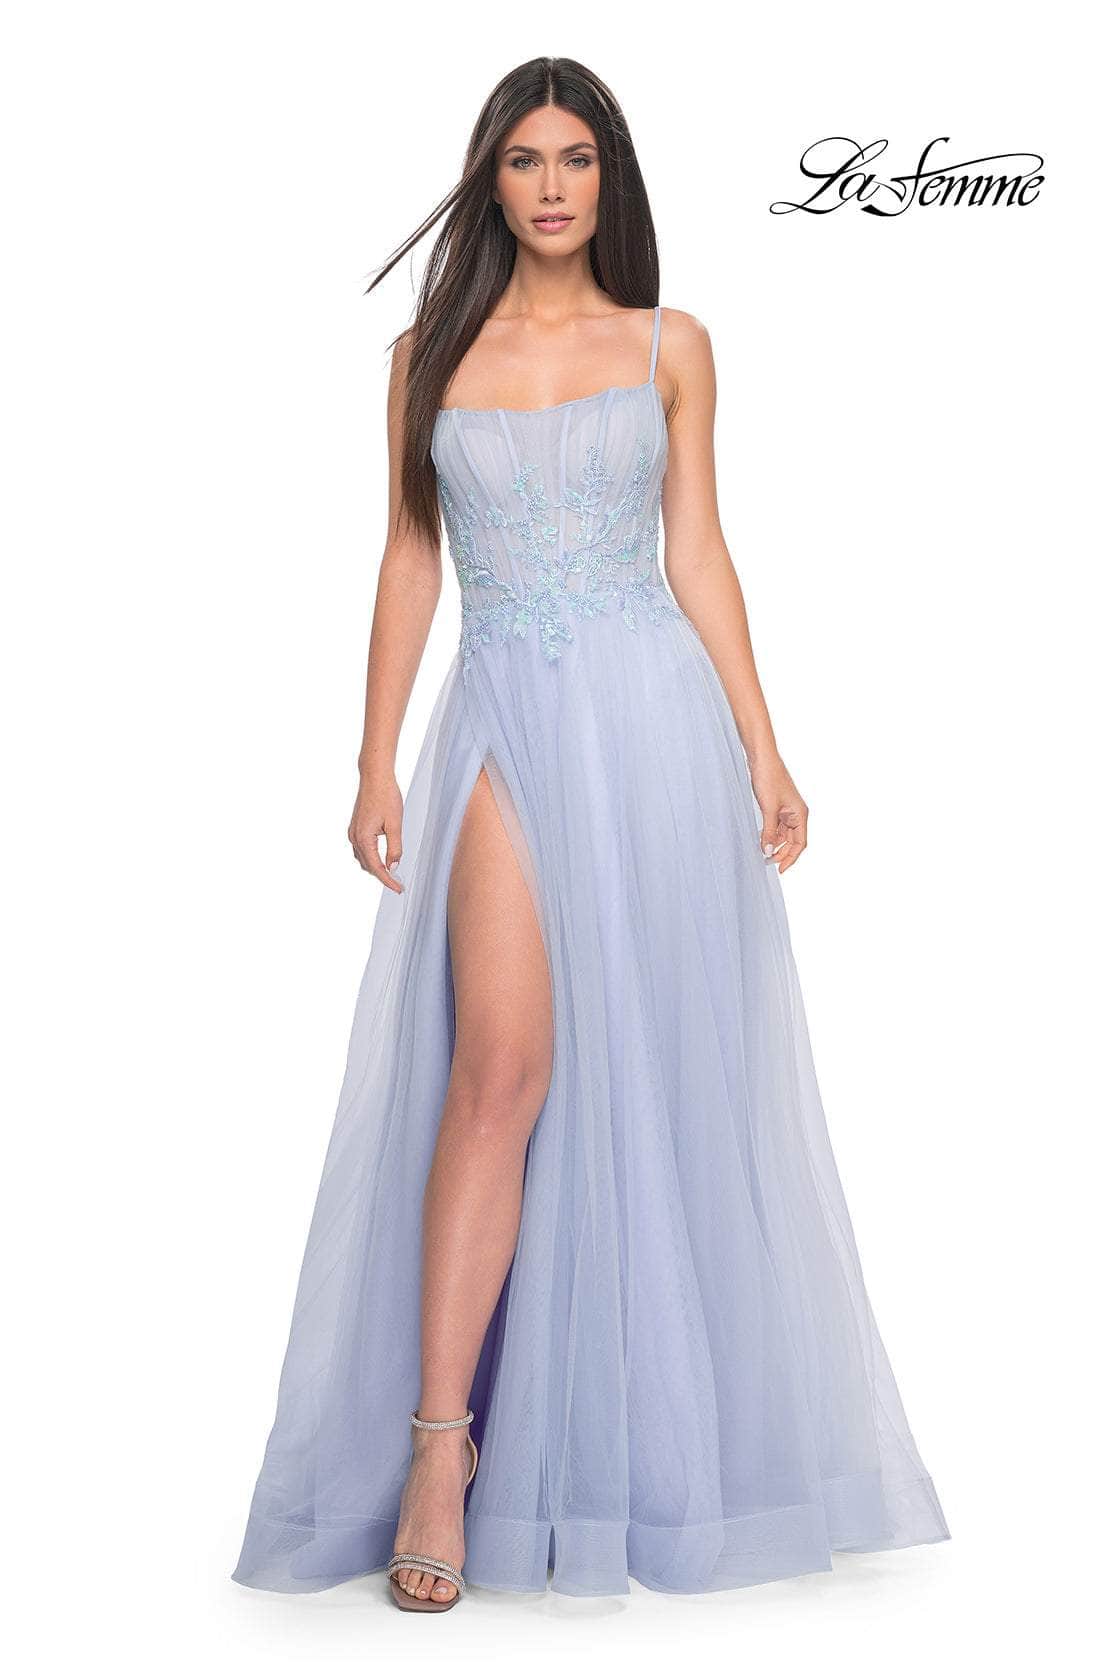 La Femme 32293 - Embroidered Scoop Neck Prom Gown
